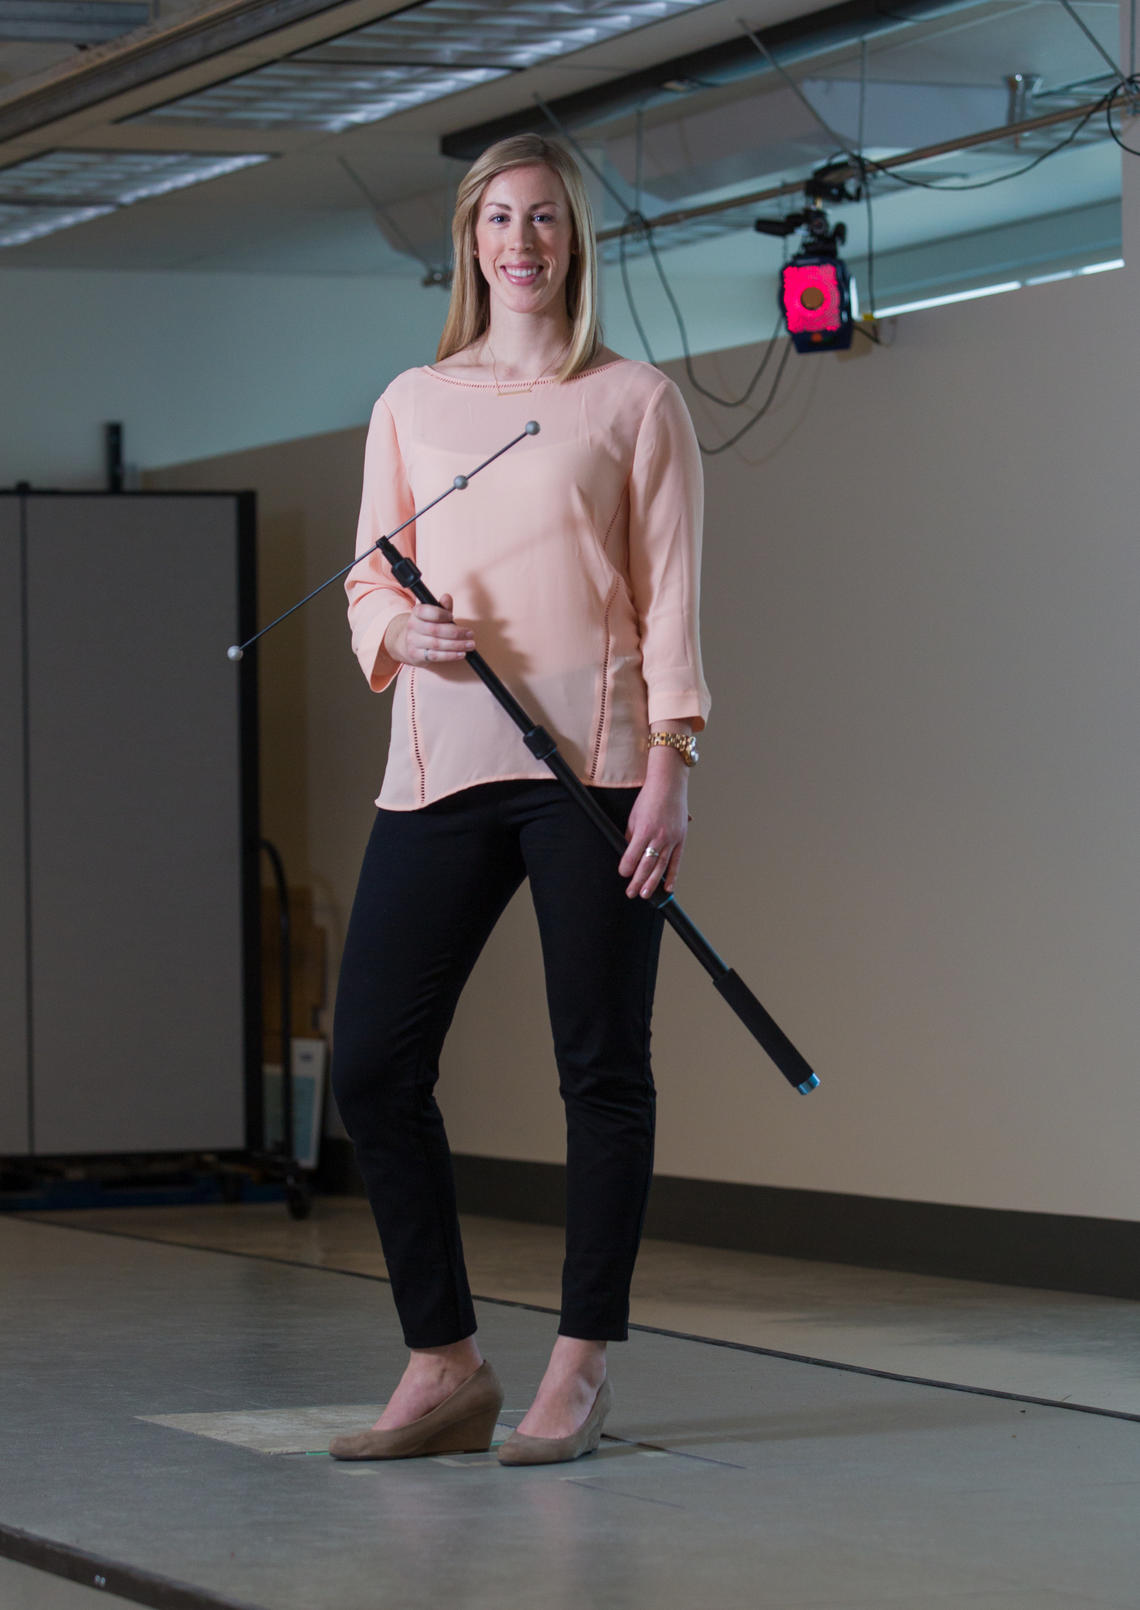 In addition to her PhD studies in biomedical research, Emily Bishop helped organize the annual Alberta Biomedical Engineering Conference, and she co-edited the Journal of Undergraduate Research in Alberta.